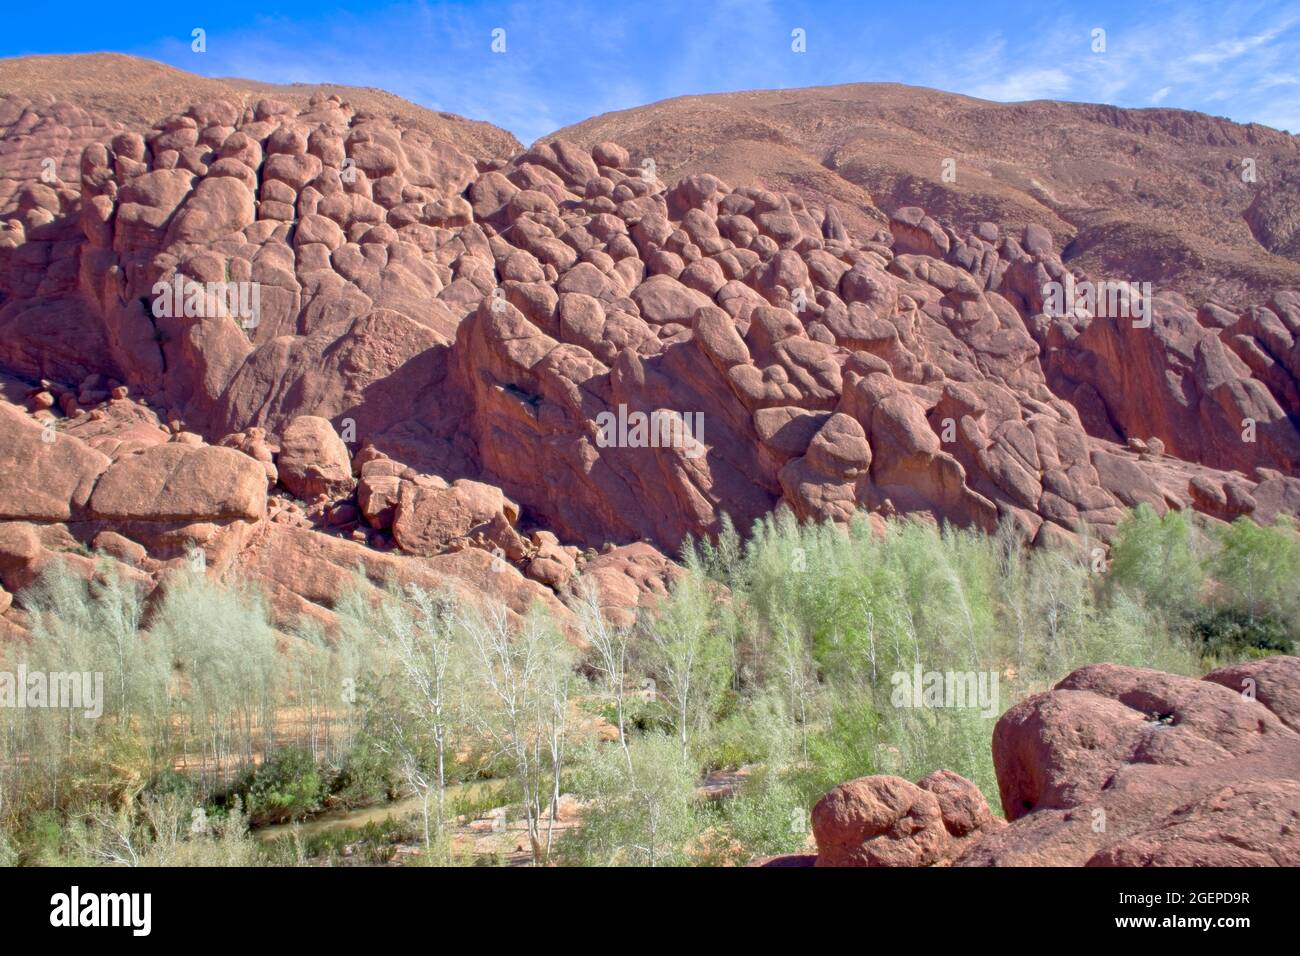 Unusual rock formation along the Dades river valley near Boumalne Dades, Morocco. Stock Photo